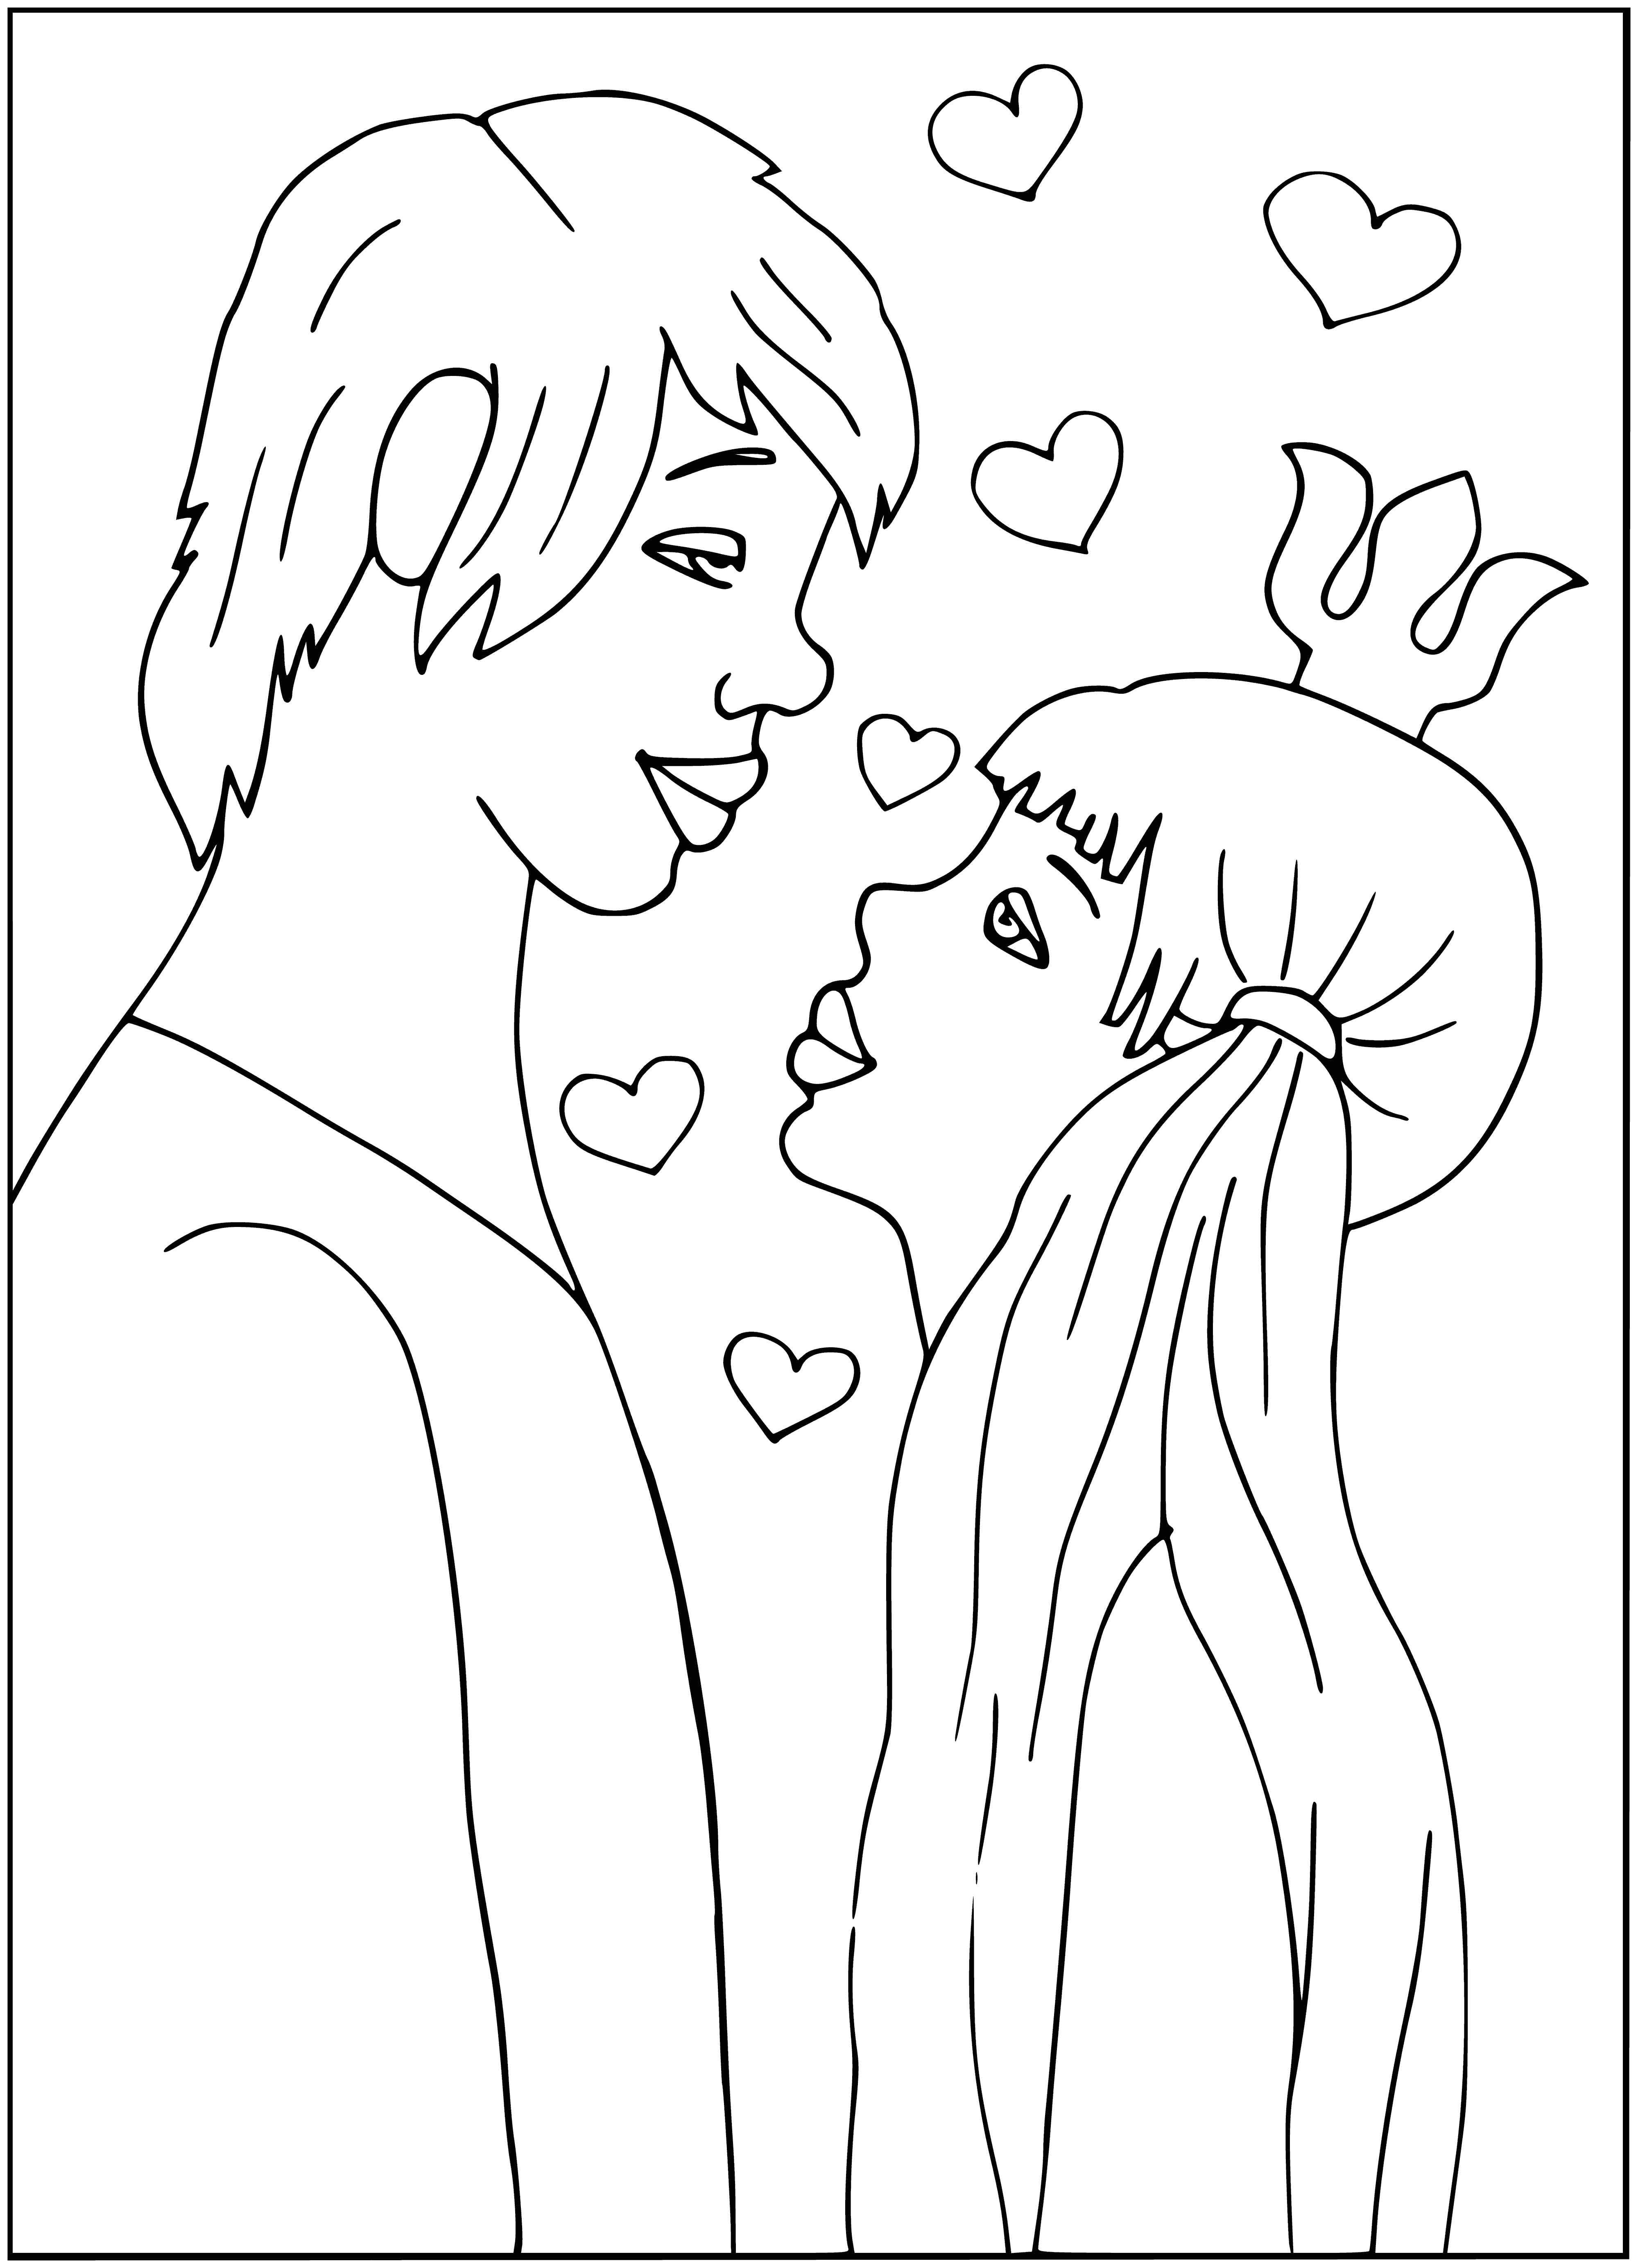 coloring page: Man plays lute and woman listens, both smiling in a coloring page.